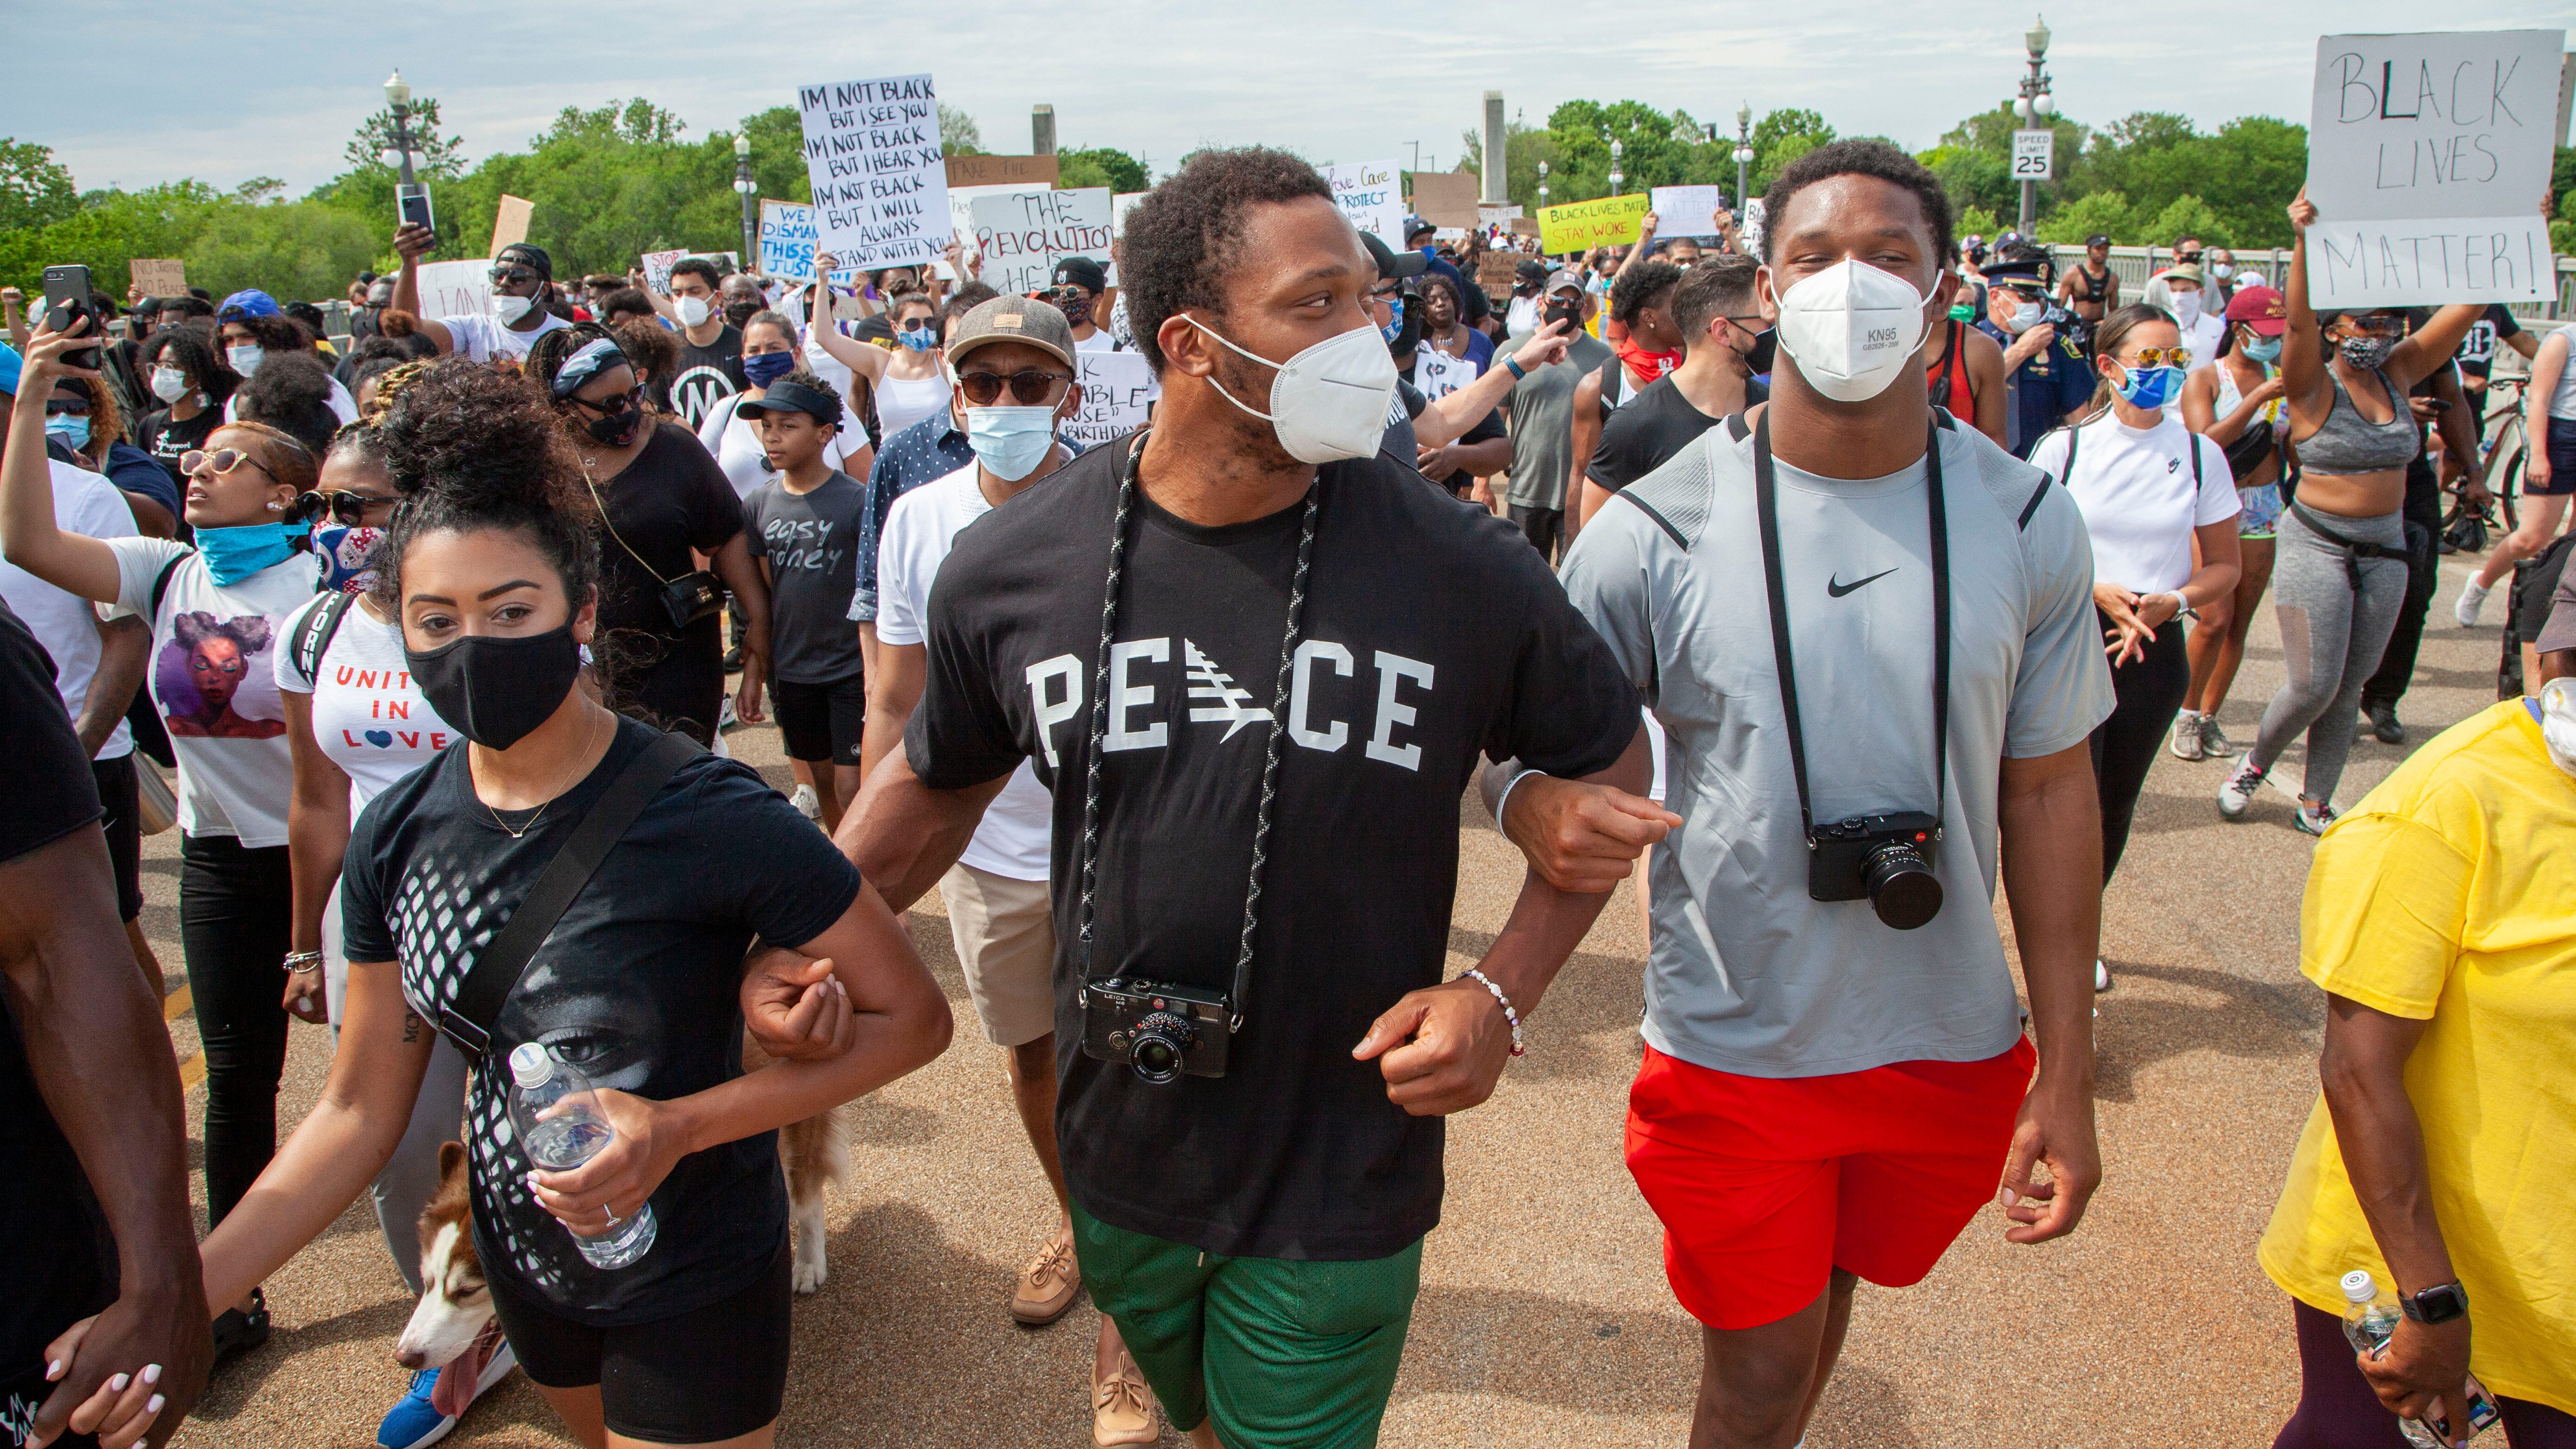 Detroit Lions player, Romeo Okwara, center, and his brother Julian, right, lead protesters arm and arm as they march across the MacArthur Bridge across the Detroit River to and from Belle Isle during a rally in Detroit, Friday, June 5, 2020, protesting police brutality and the death of George Floyd.